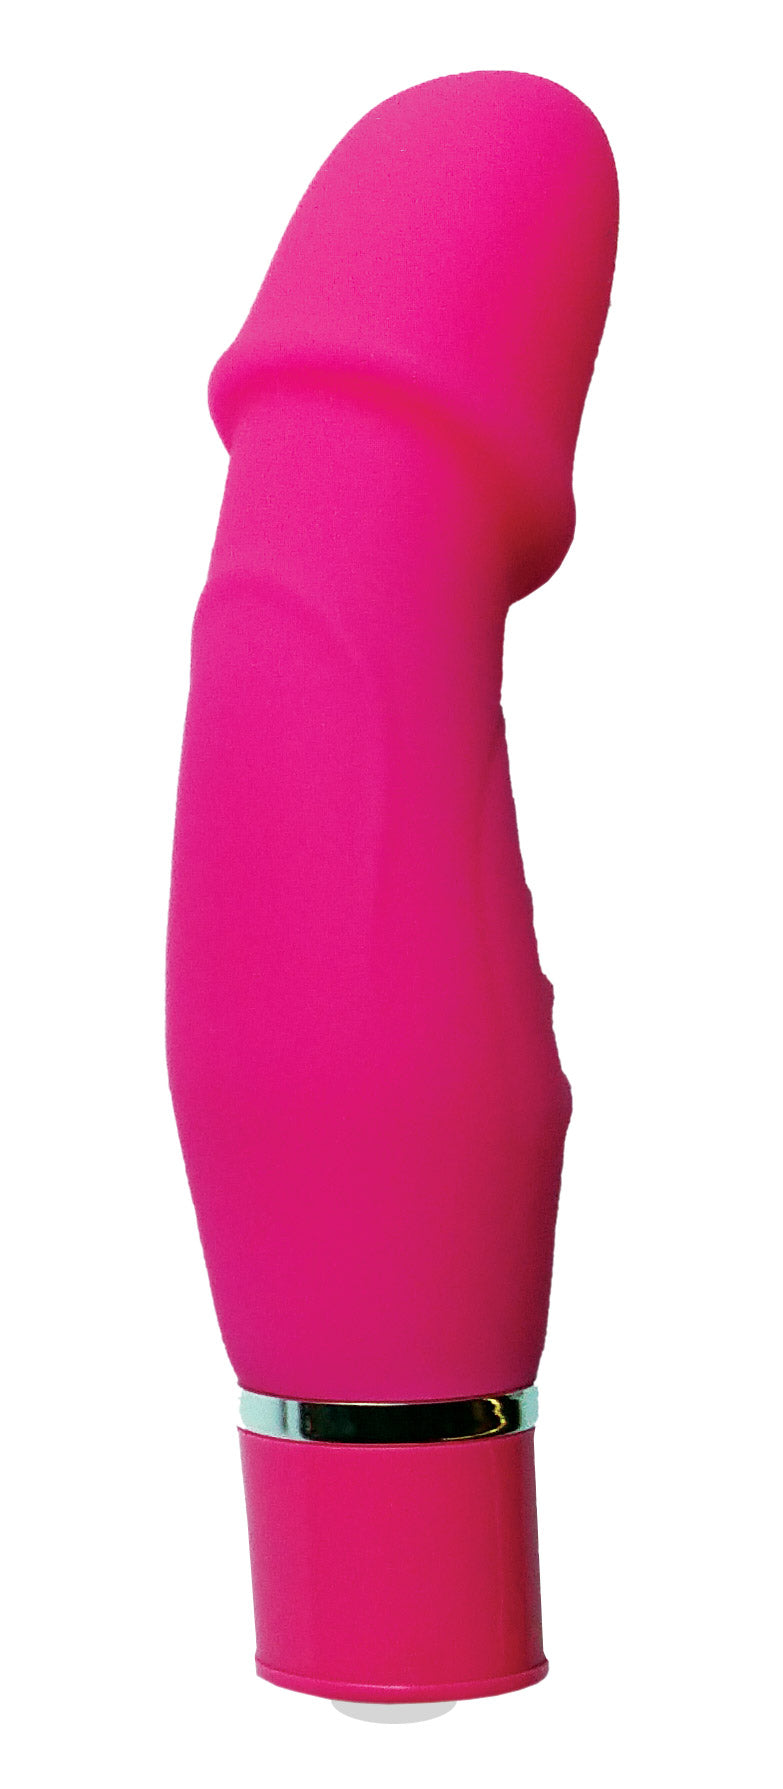 Spice up Your Life with the Mighty Mini Vibe - The Cock Tease